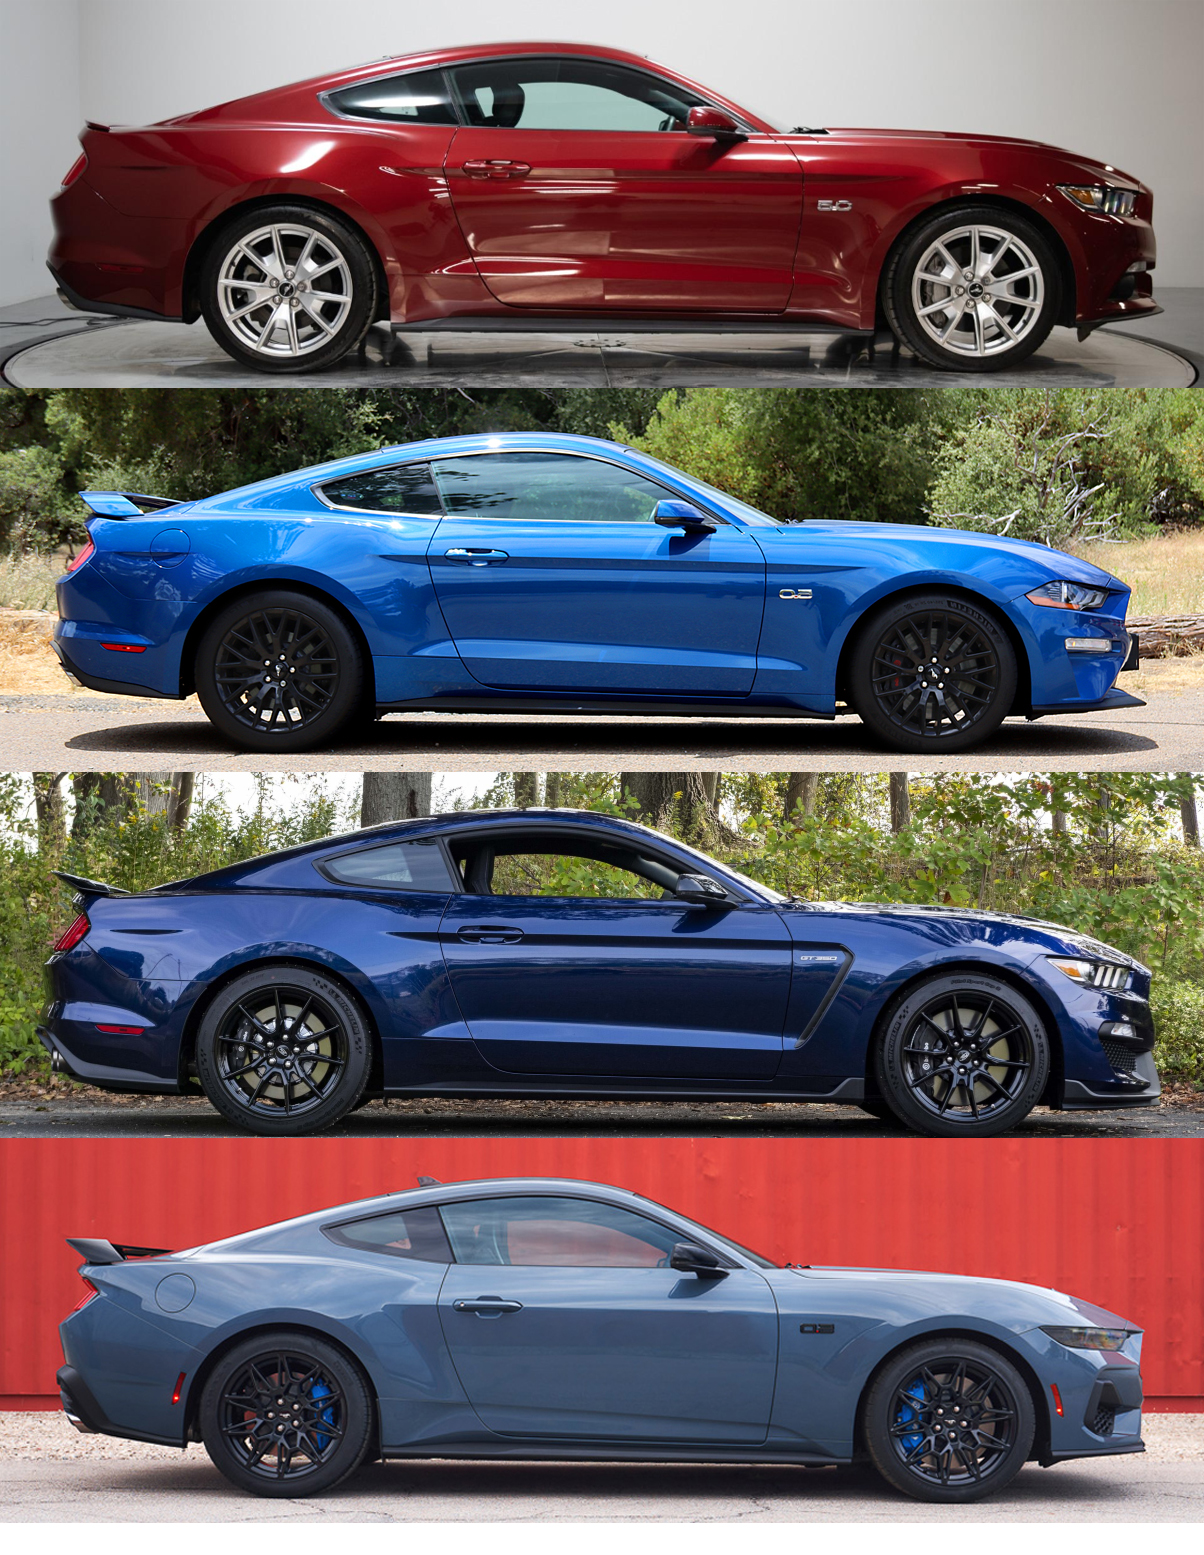 S650 Mustang S650 v S550 Mustang GT front end comparison 15GT-18GT-18GT350-24GT